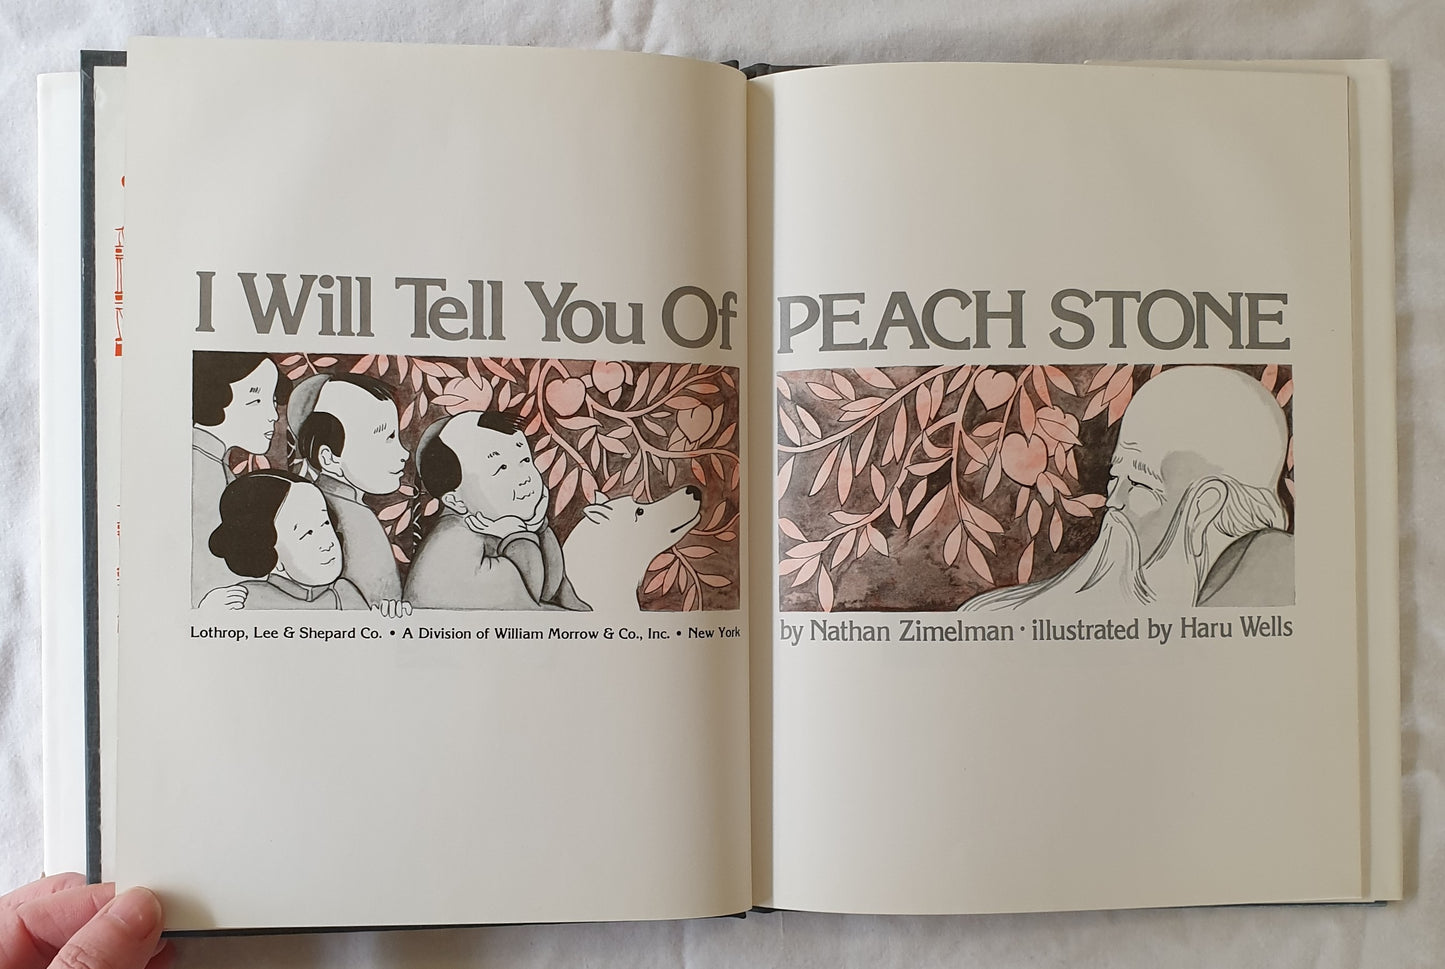 I Will Tell You of Peach Stone by Nathan Zimelman